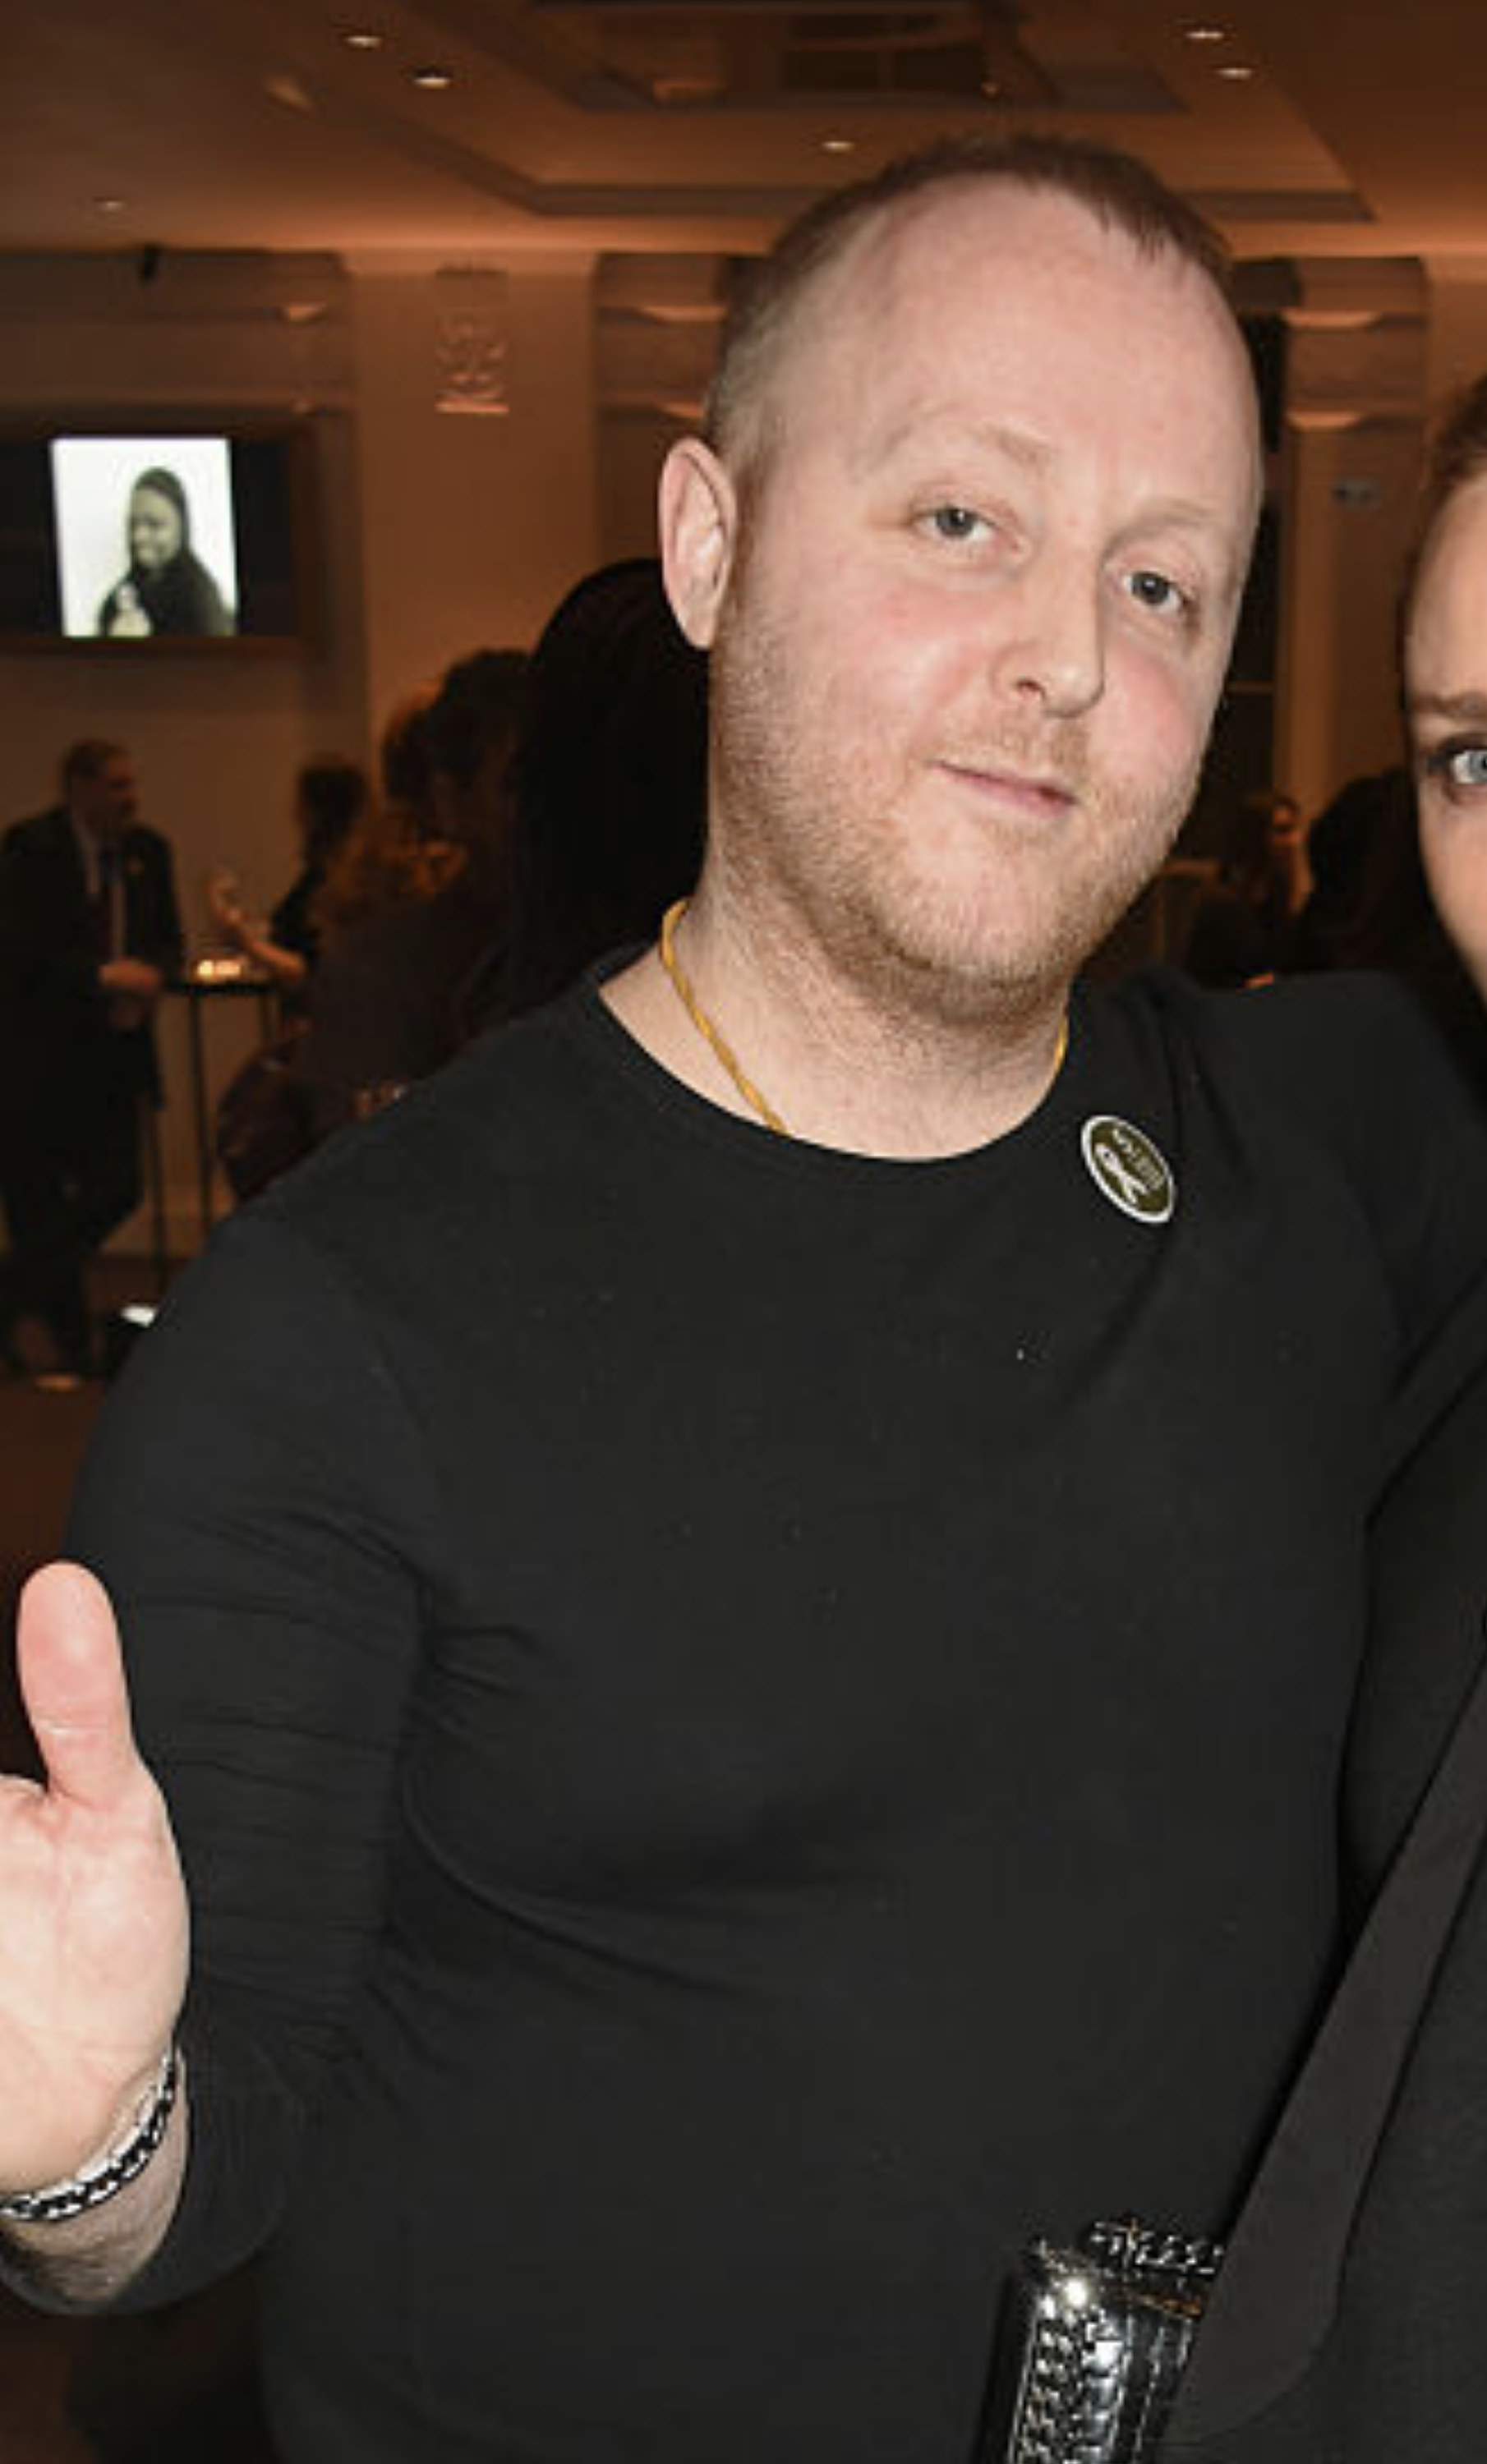 McCartney at a documentary screening in 2016